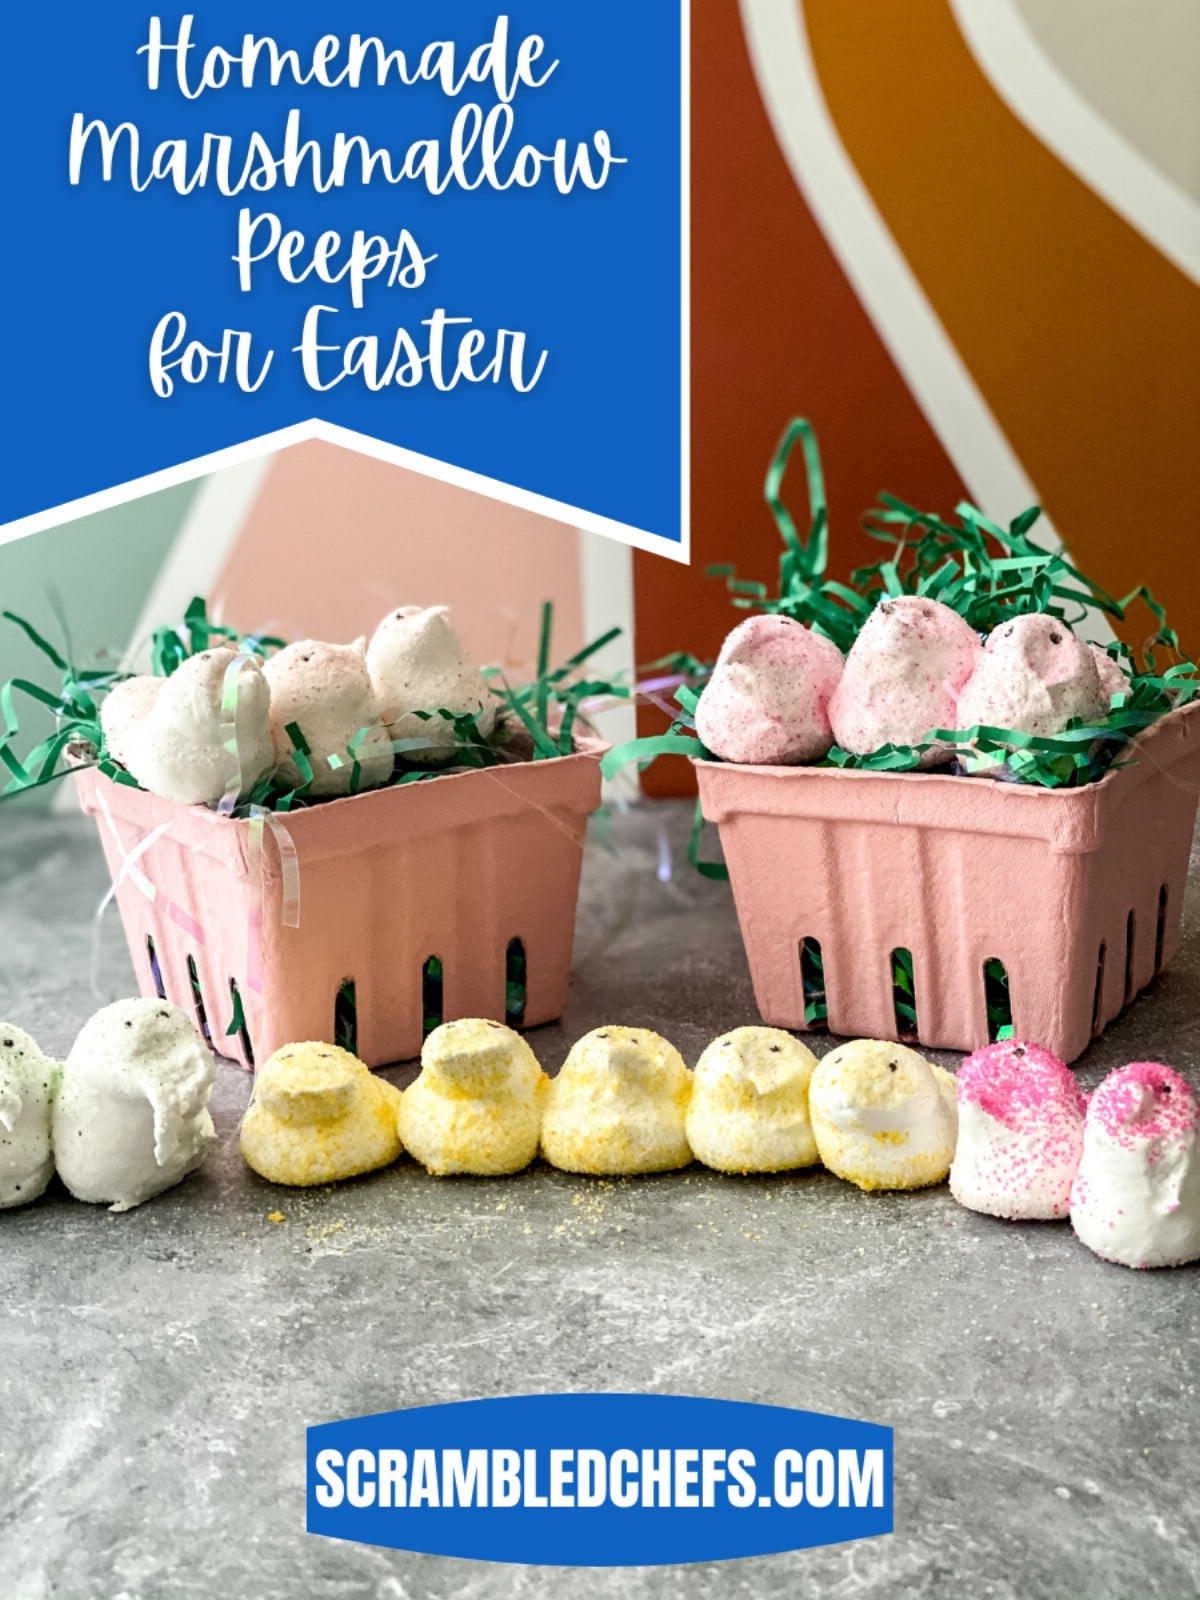 Marshmallows on counter with blue banner saying homemade marshmallow peeps for easter